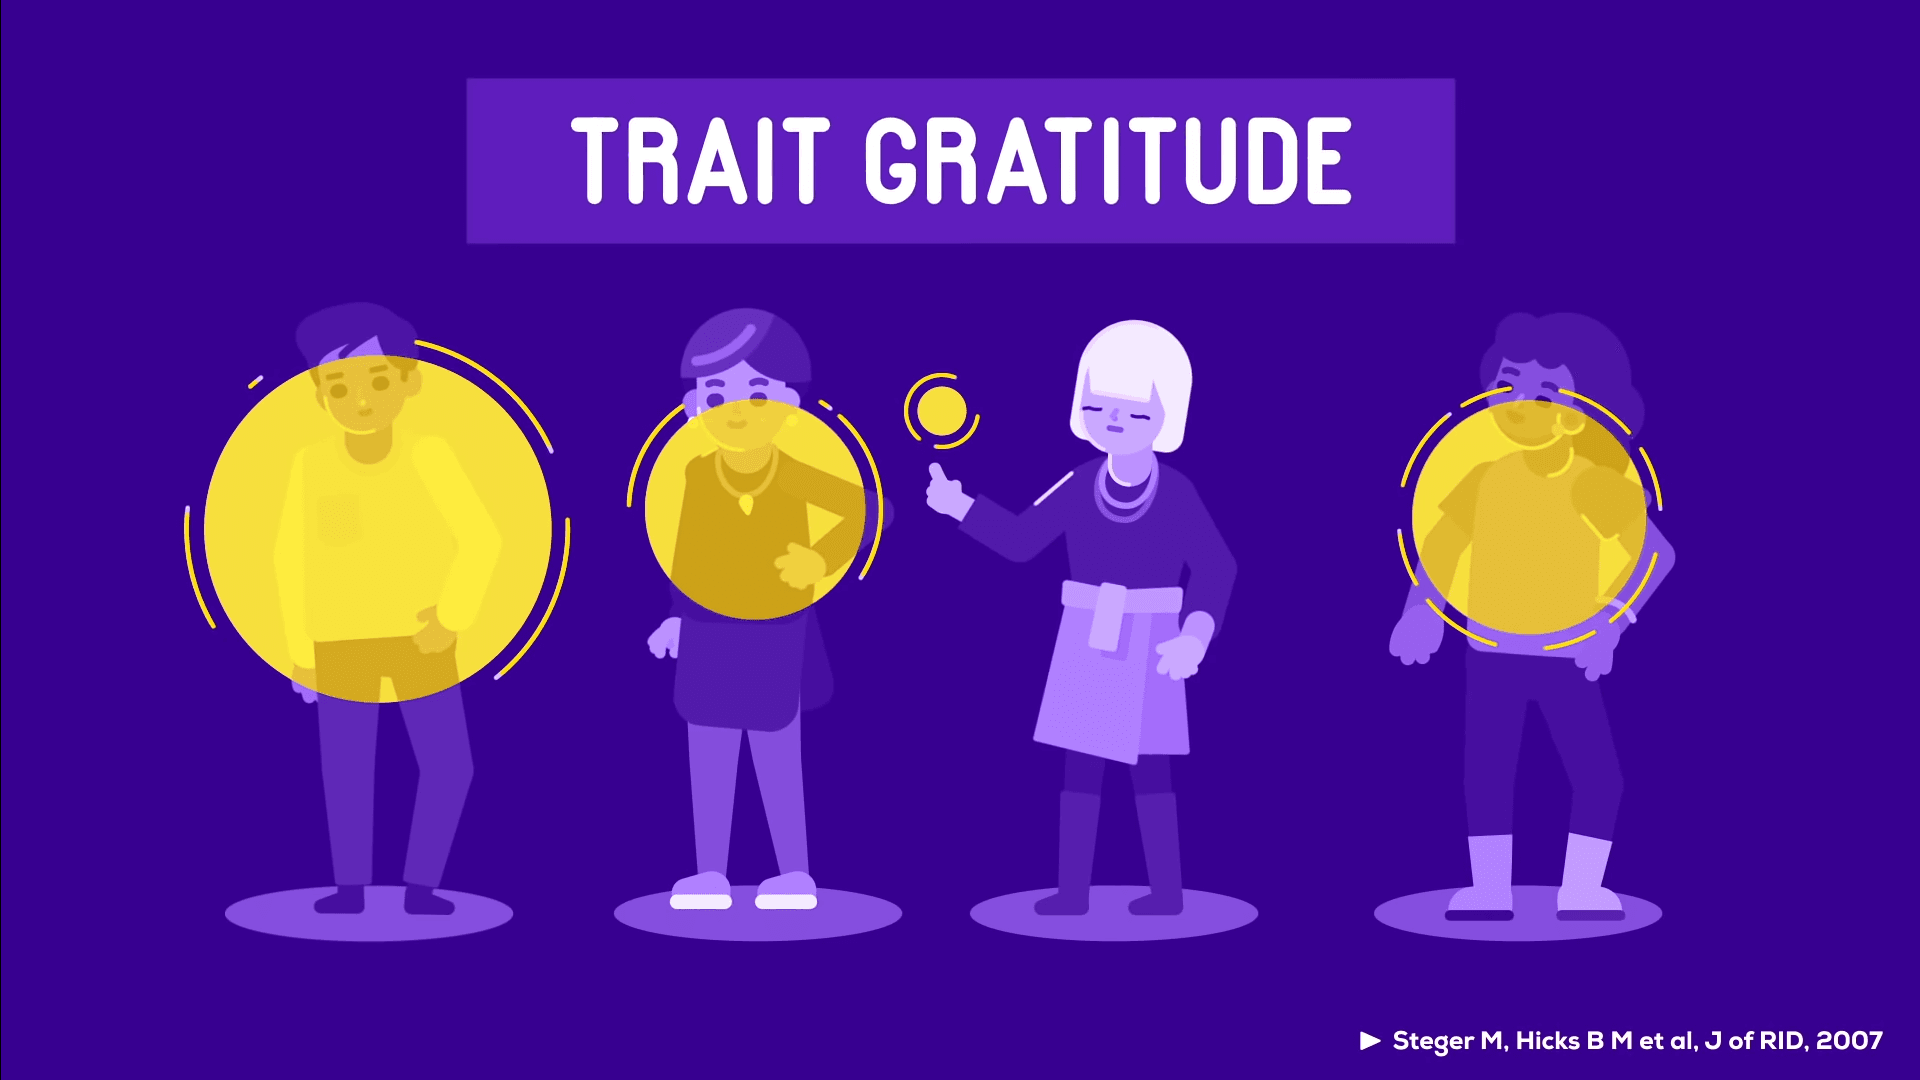 3. How To Make Your Brain More Grateful? 